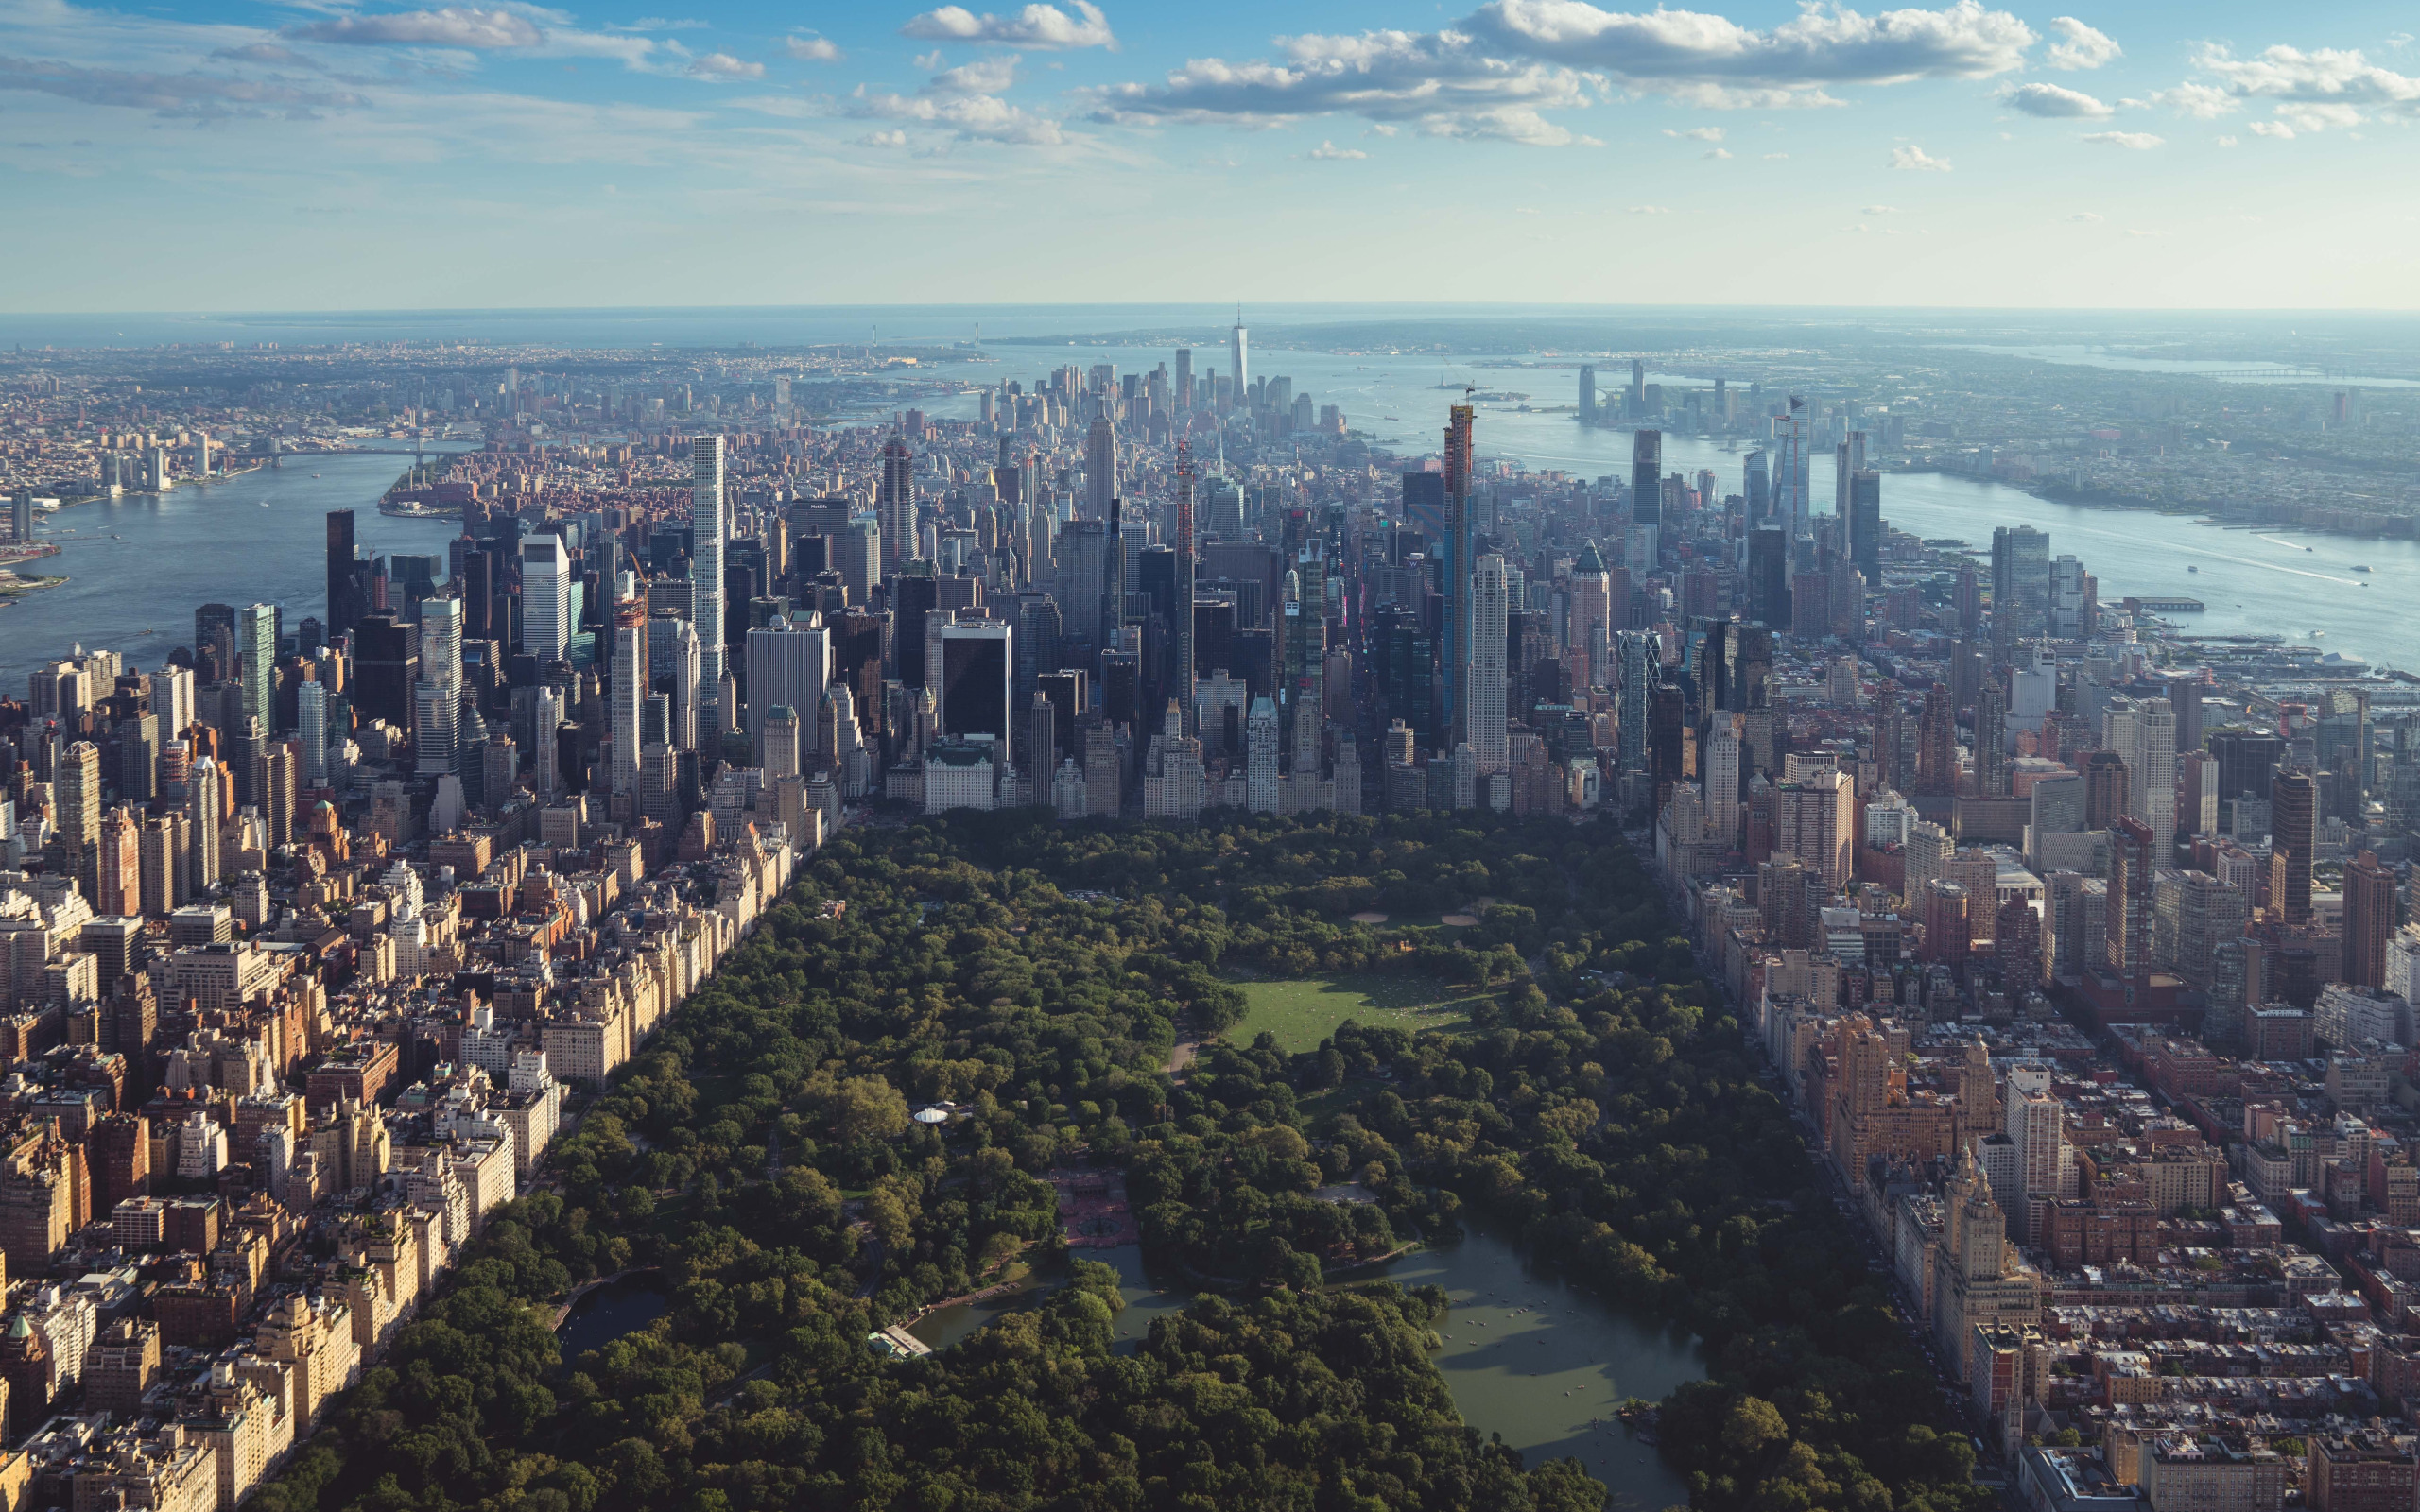 Is new york one of the largest cities in the world was фото 29